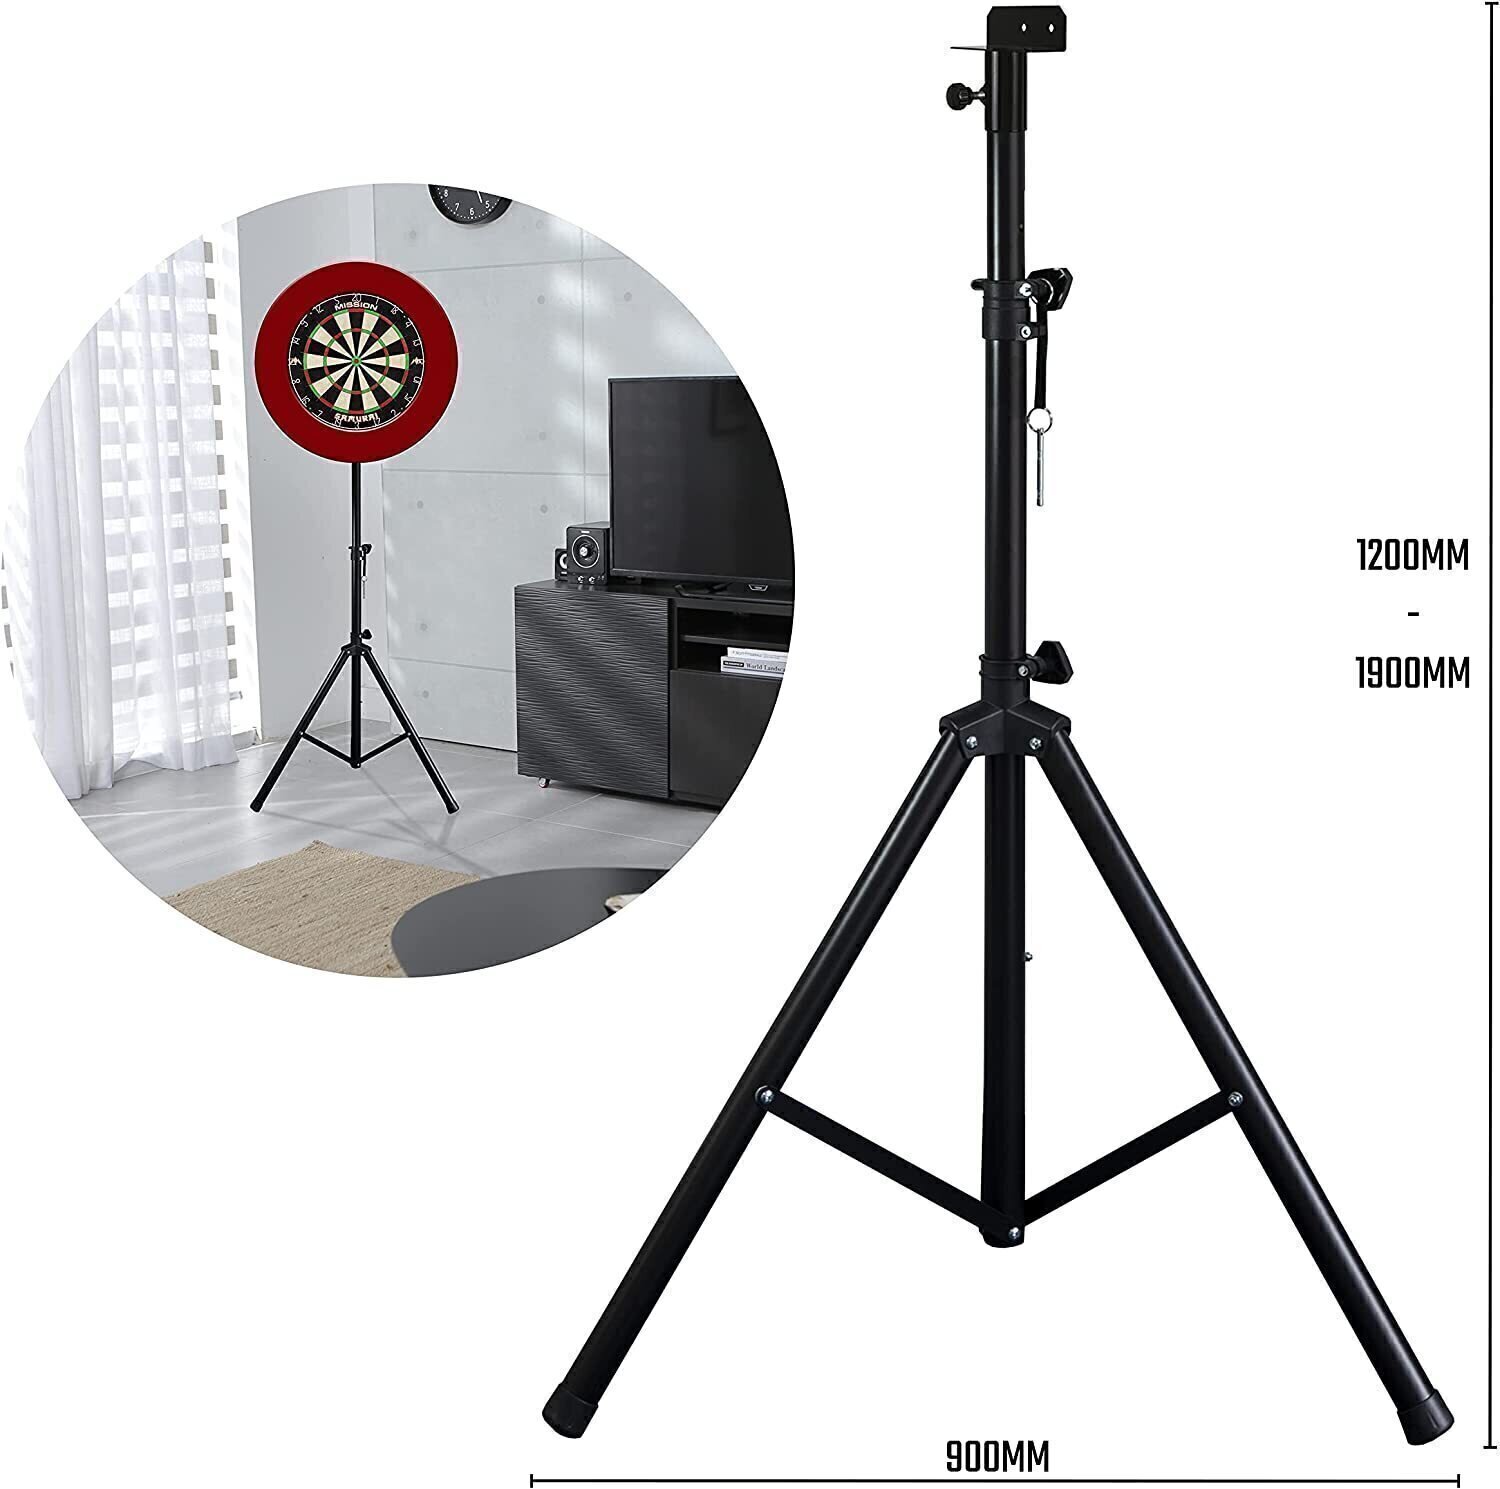 Top Quality Darts Caddy, Portable Dartboard Stand for the Serious Darts Players - STAND ONLY